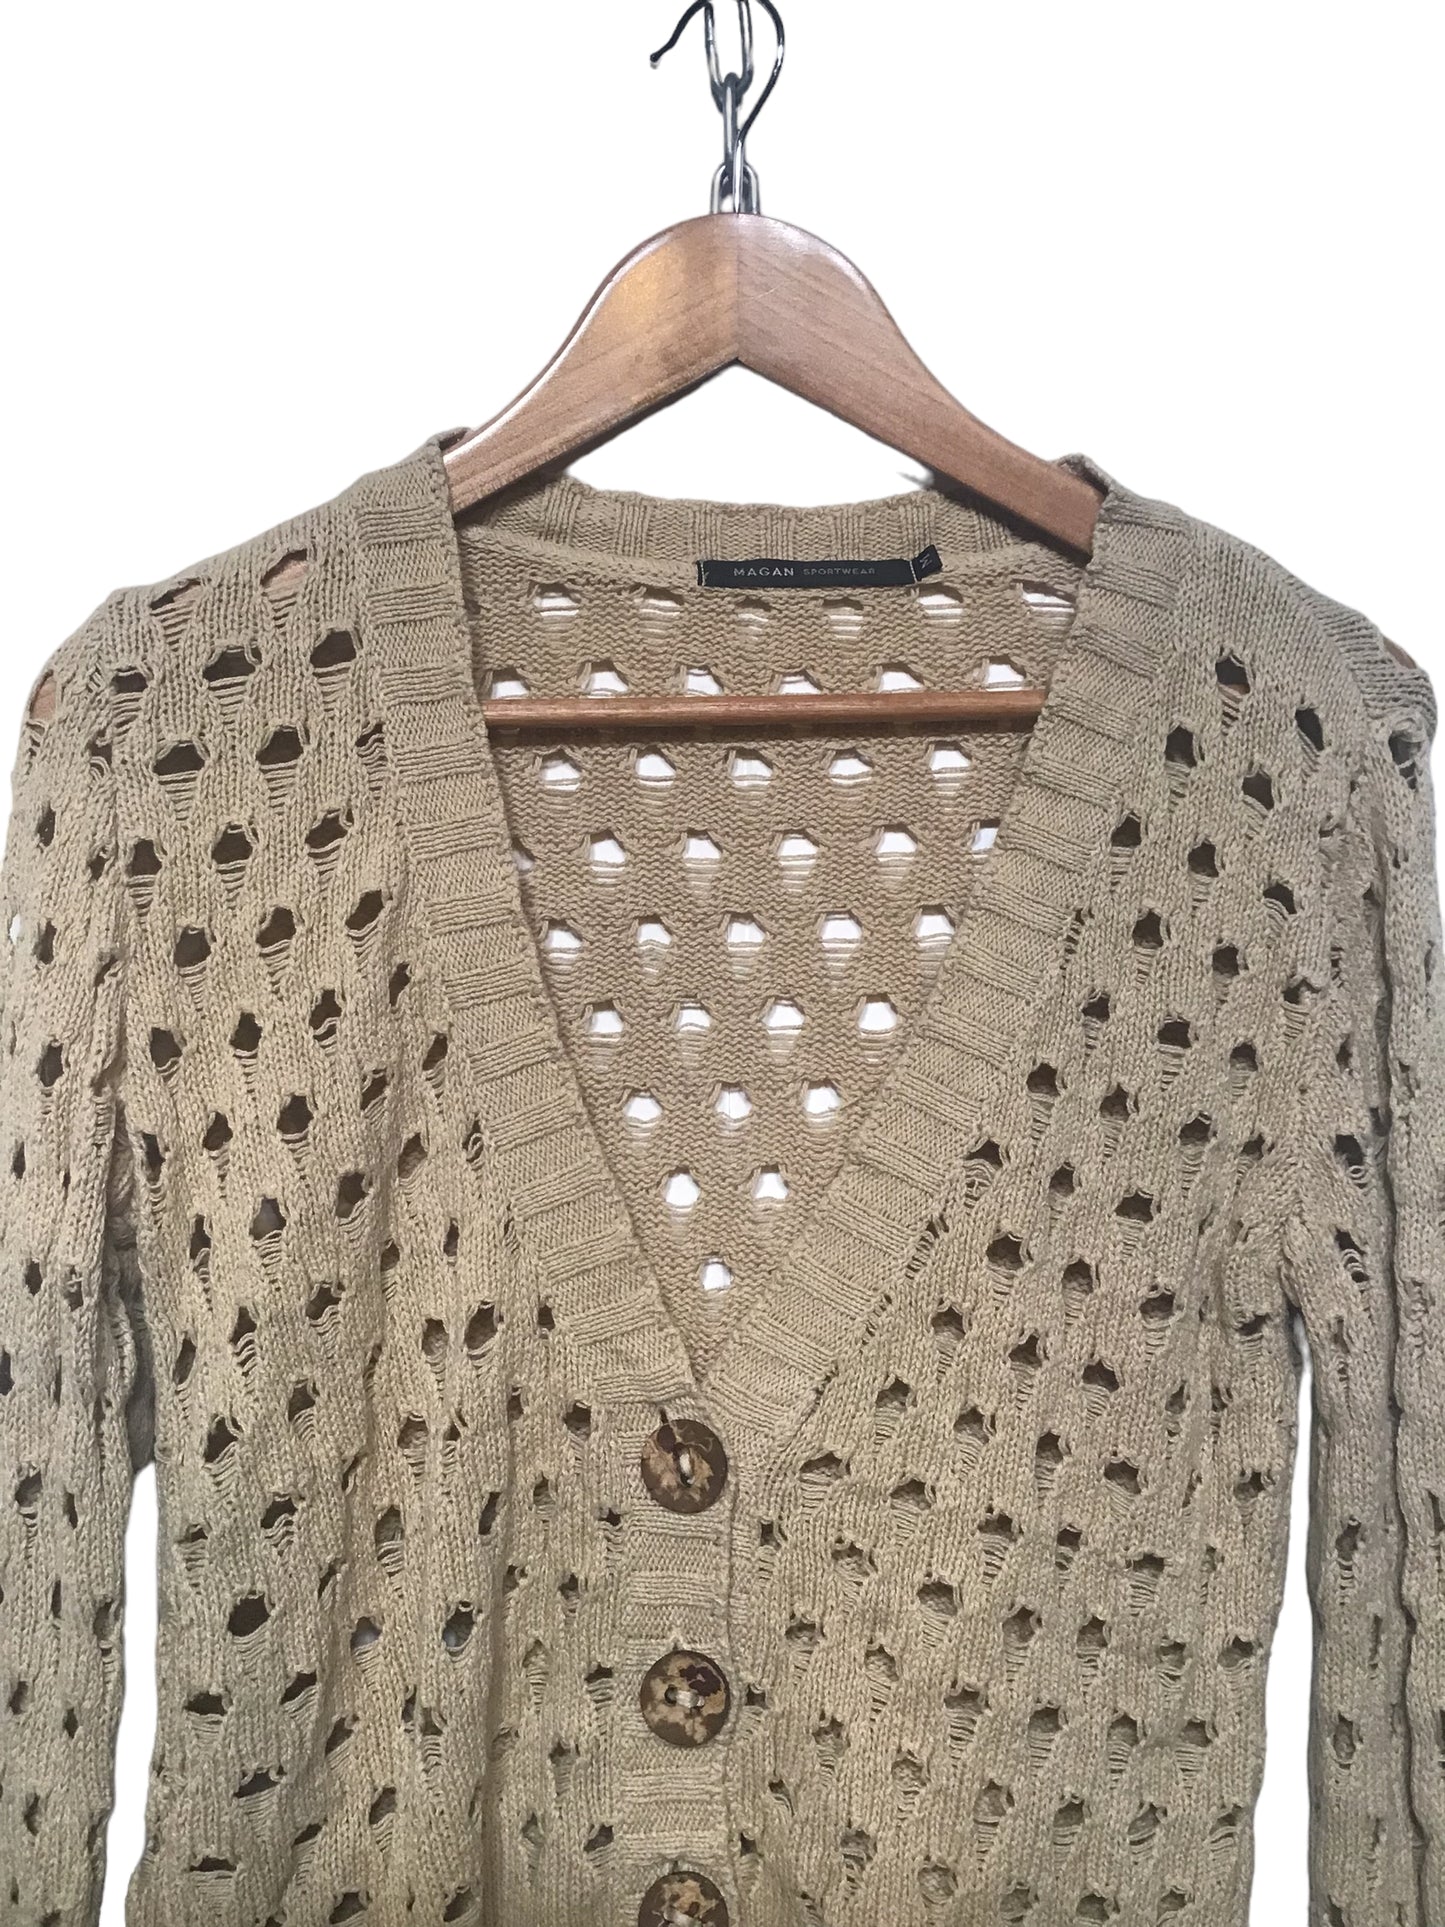 Magan Knitted Cut-Out Cardigan (Size M)